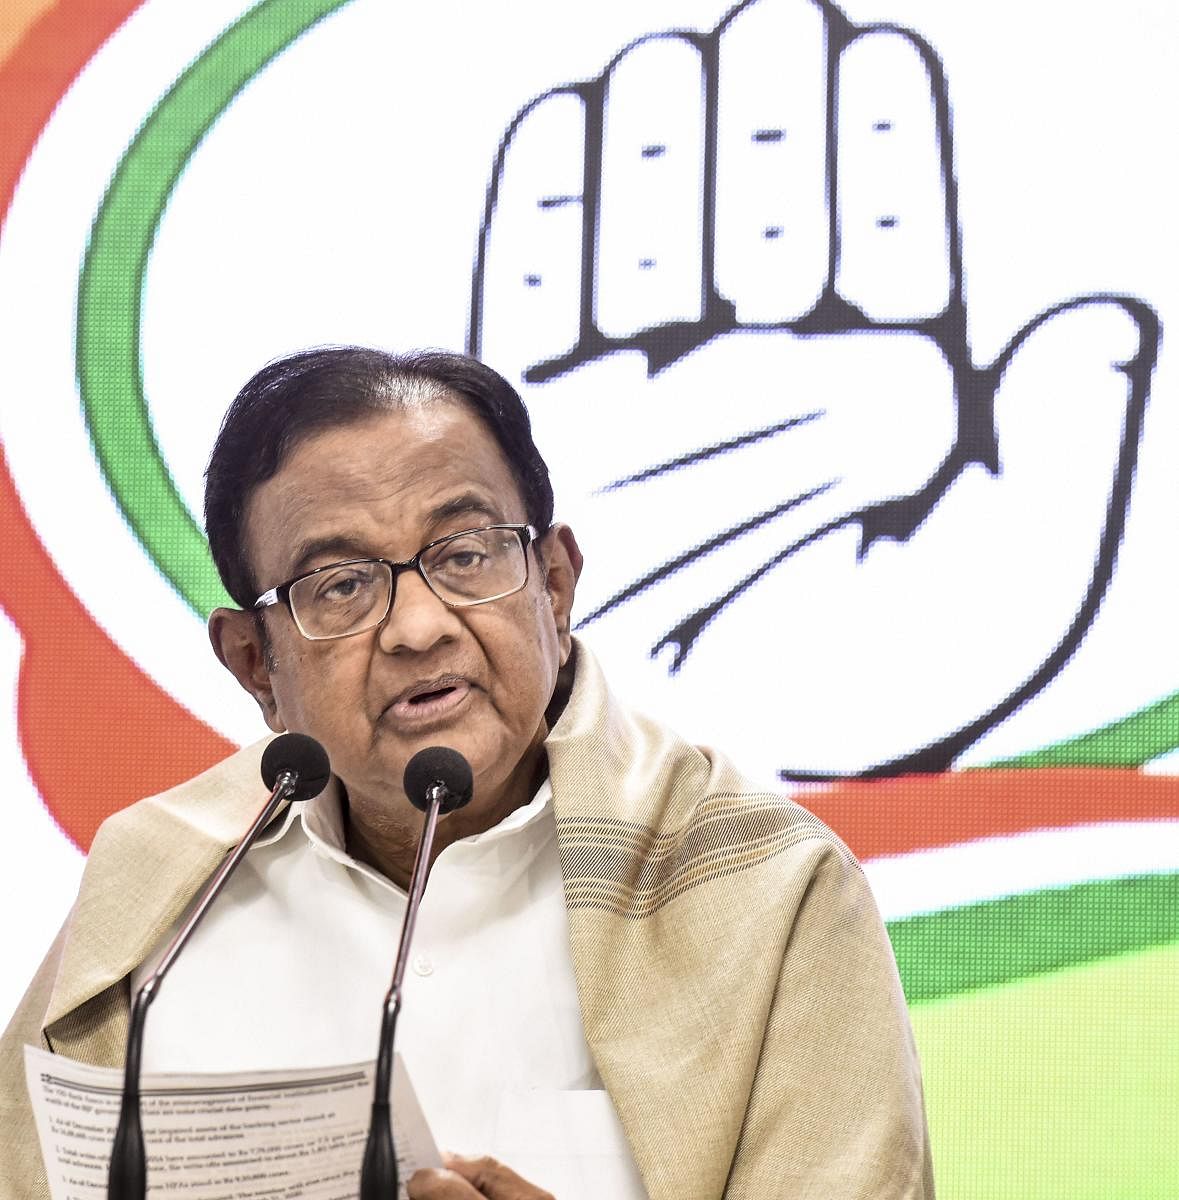 Chidambaram said issues such as boycotting Chinese goods should not be brought up when “grave matters” such as the defence of India and its territory were being debated. PTI